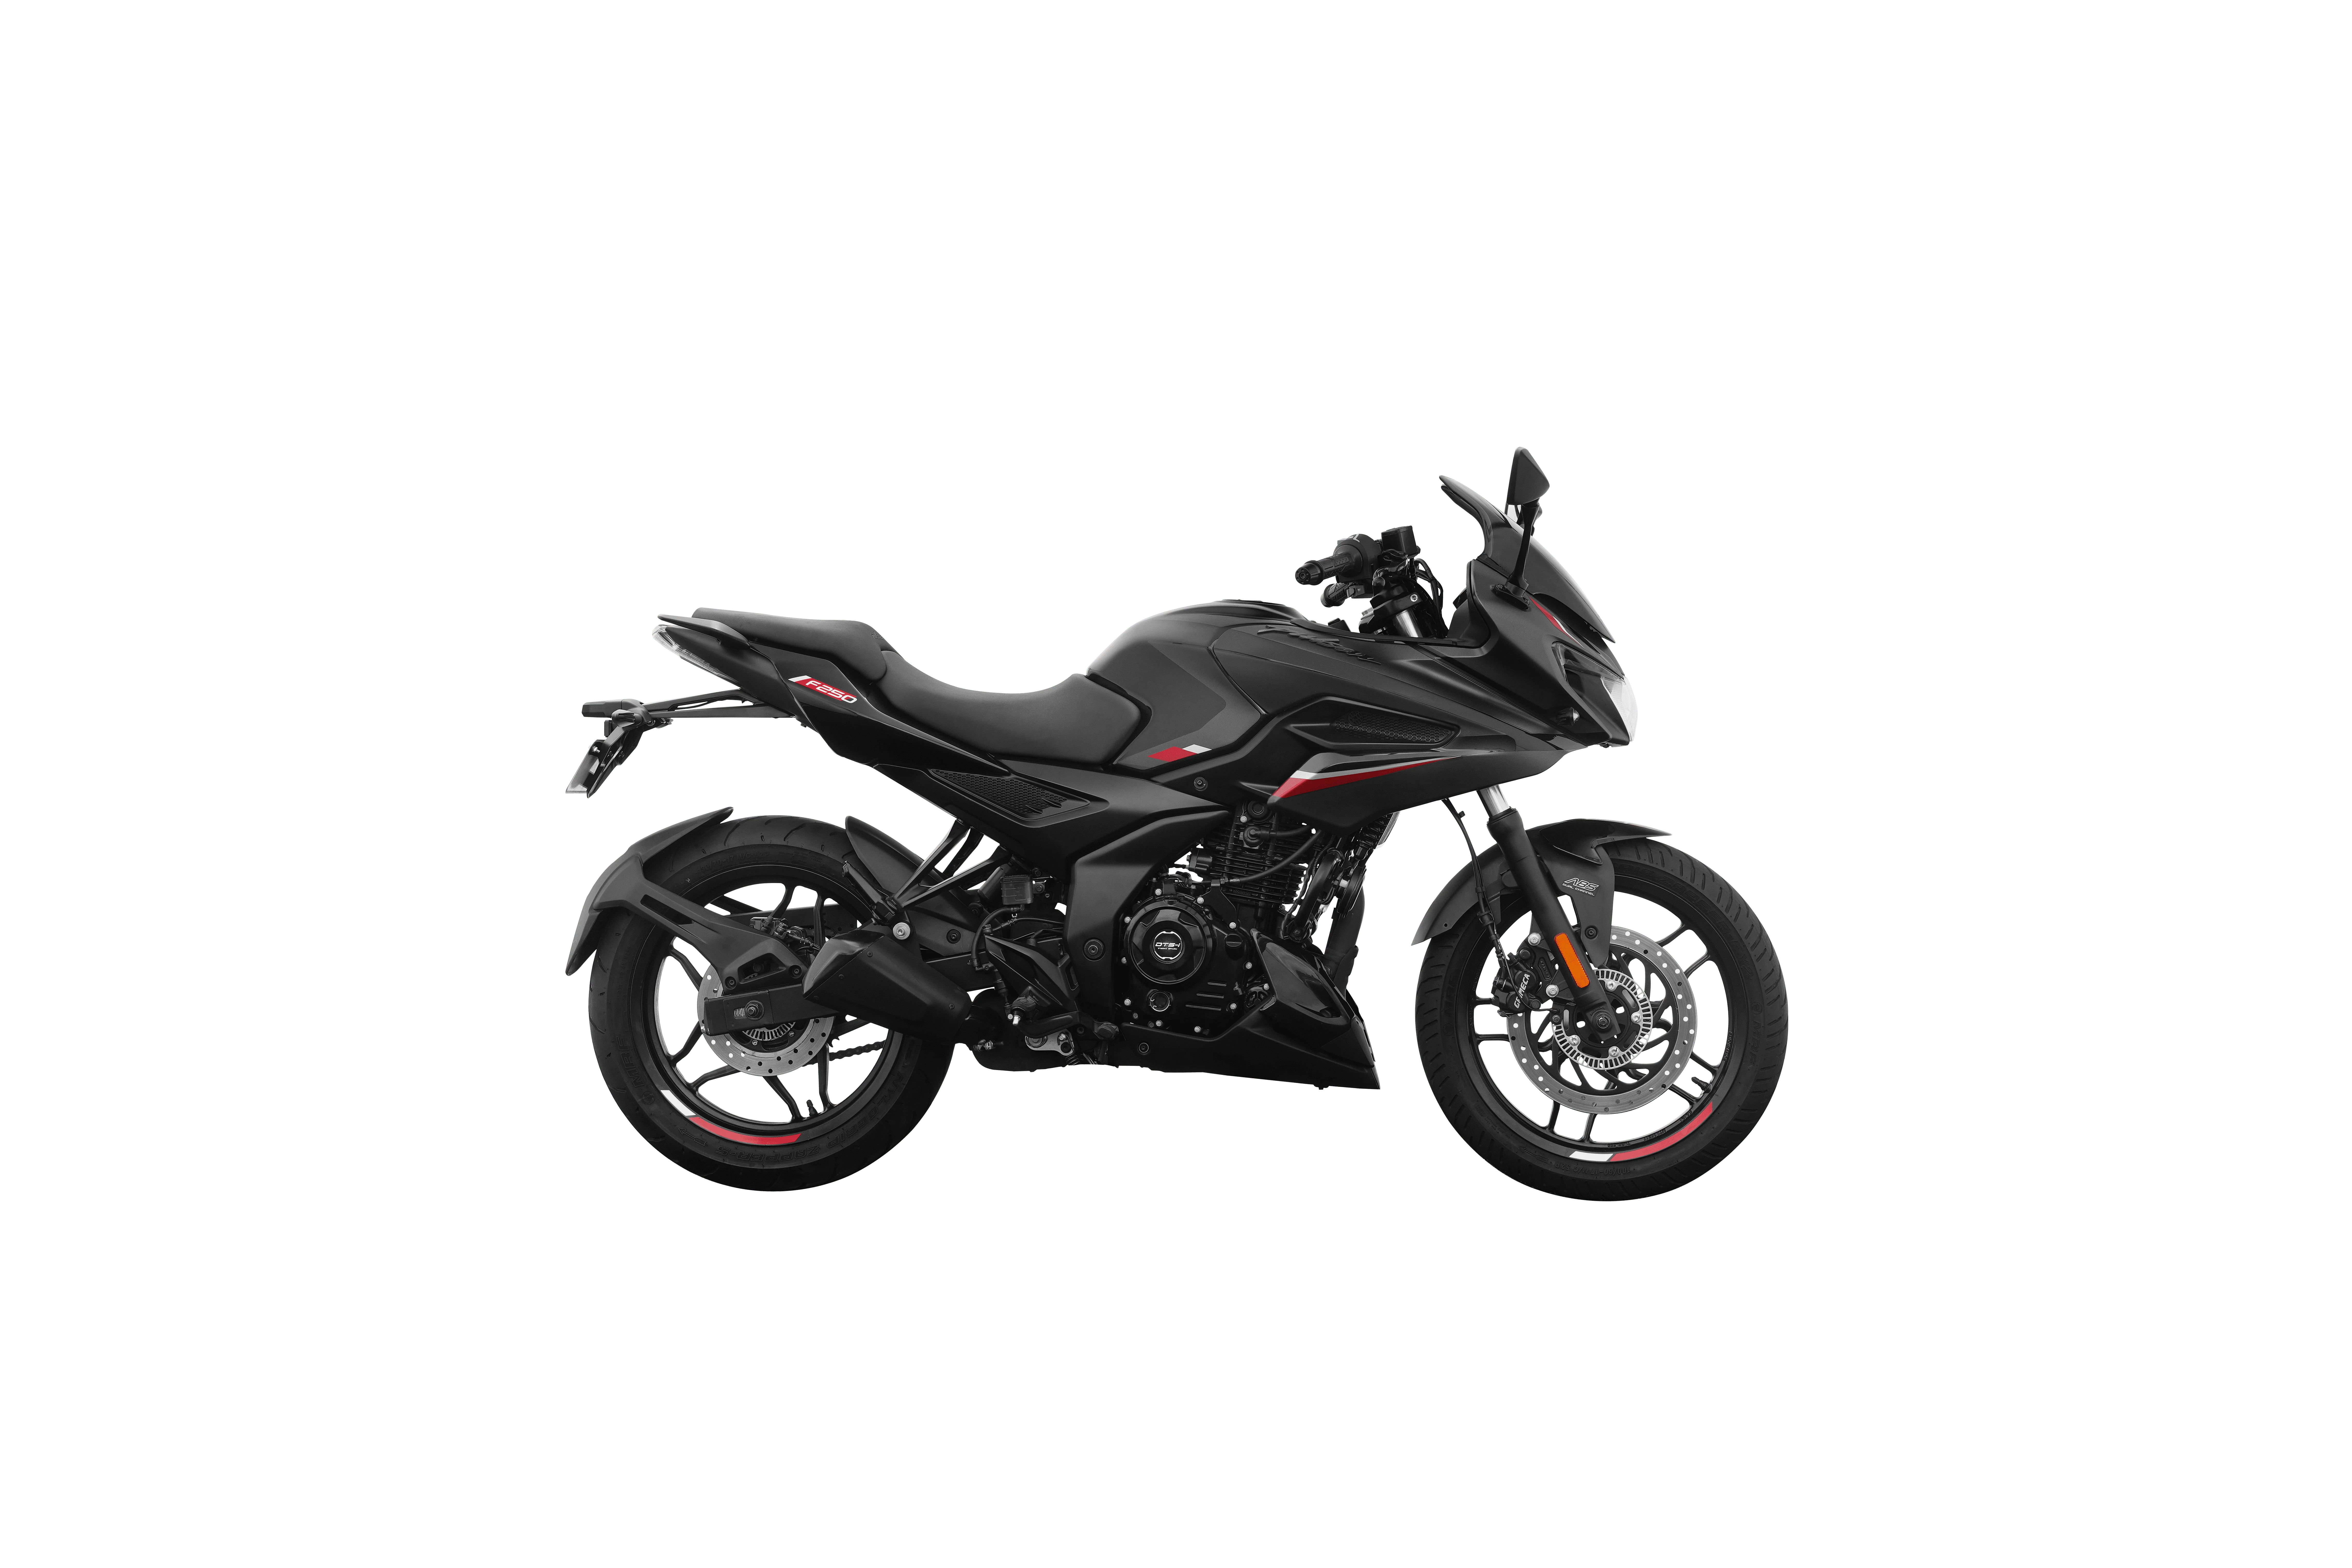 All Black Dual Channel ABS Pulsar 250 Twins Launched!